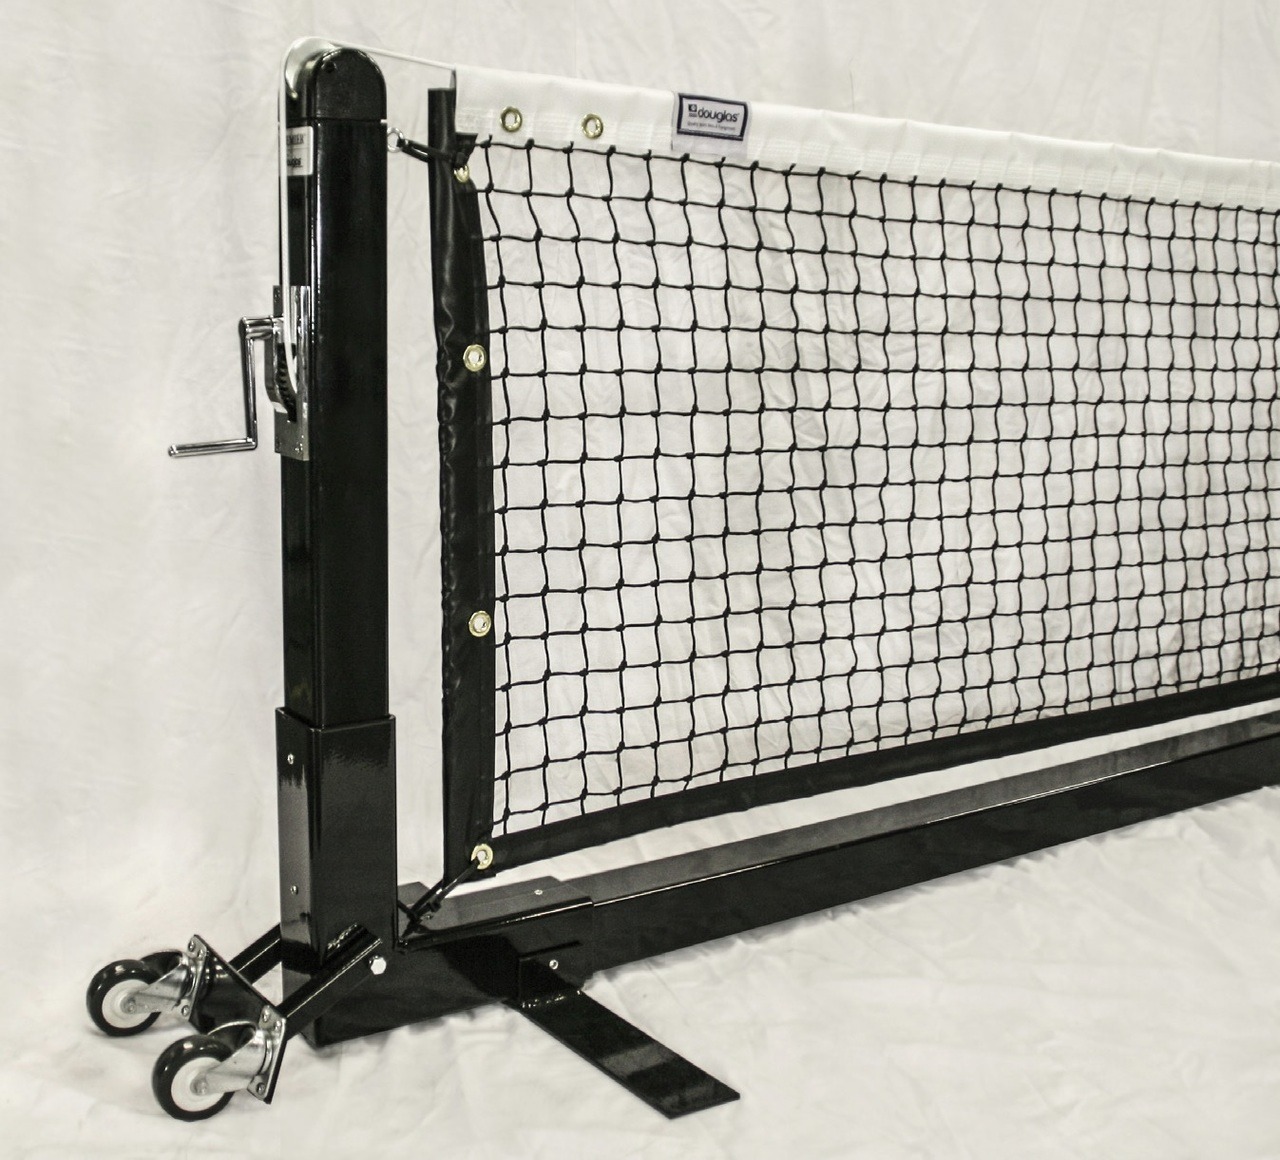 The Portable Pickleball Net System - A Great Investment